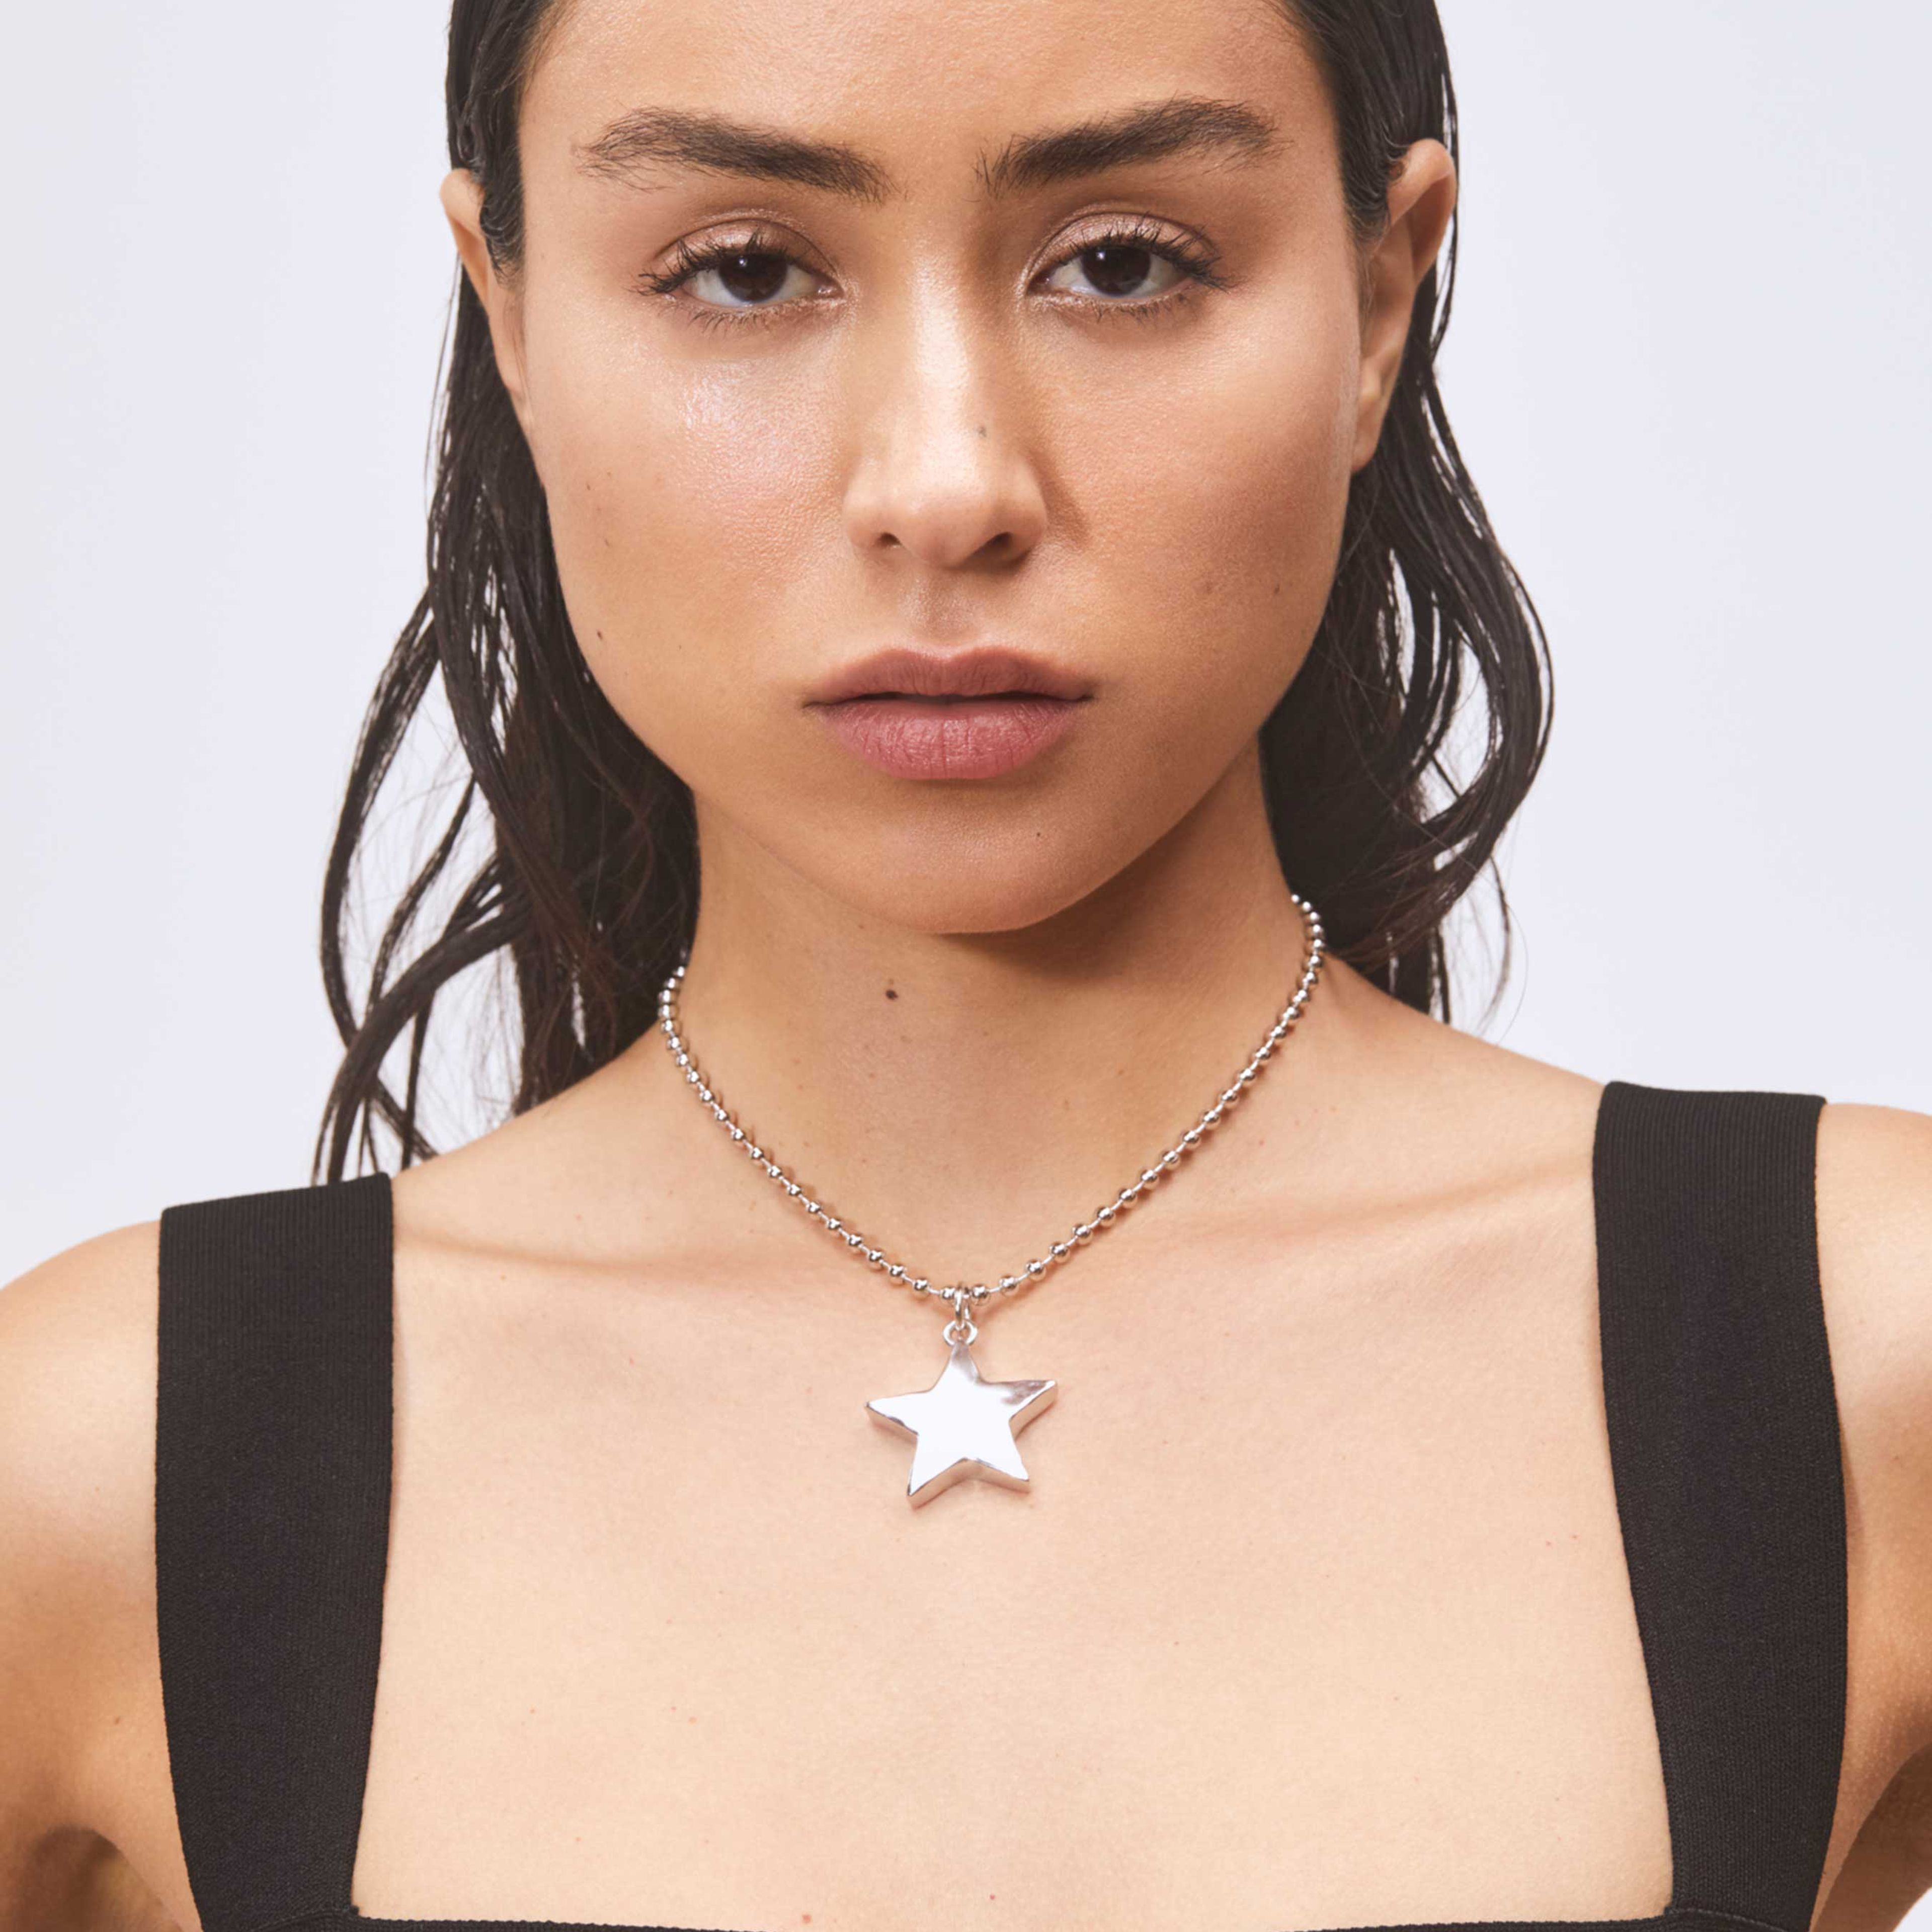 Star Pacha Necklace in Silver